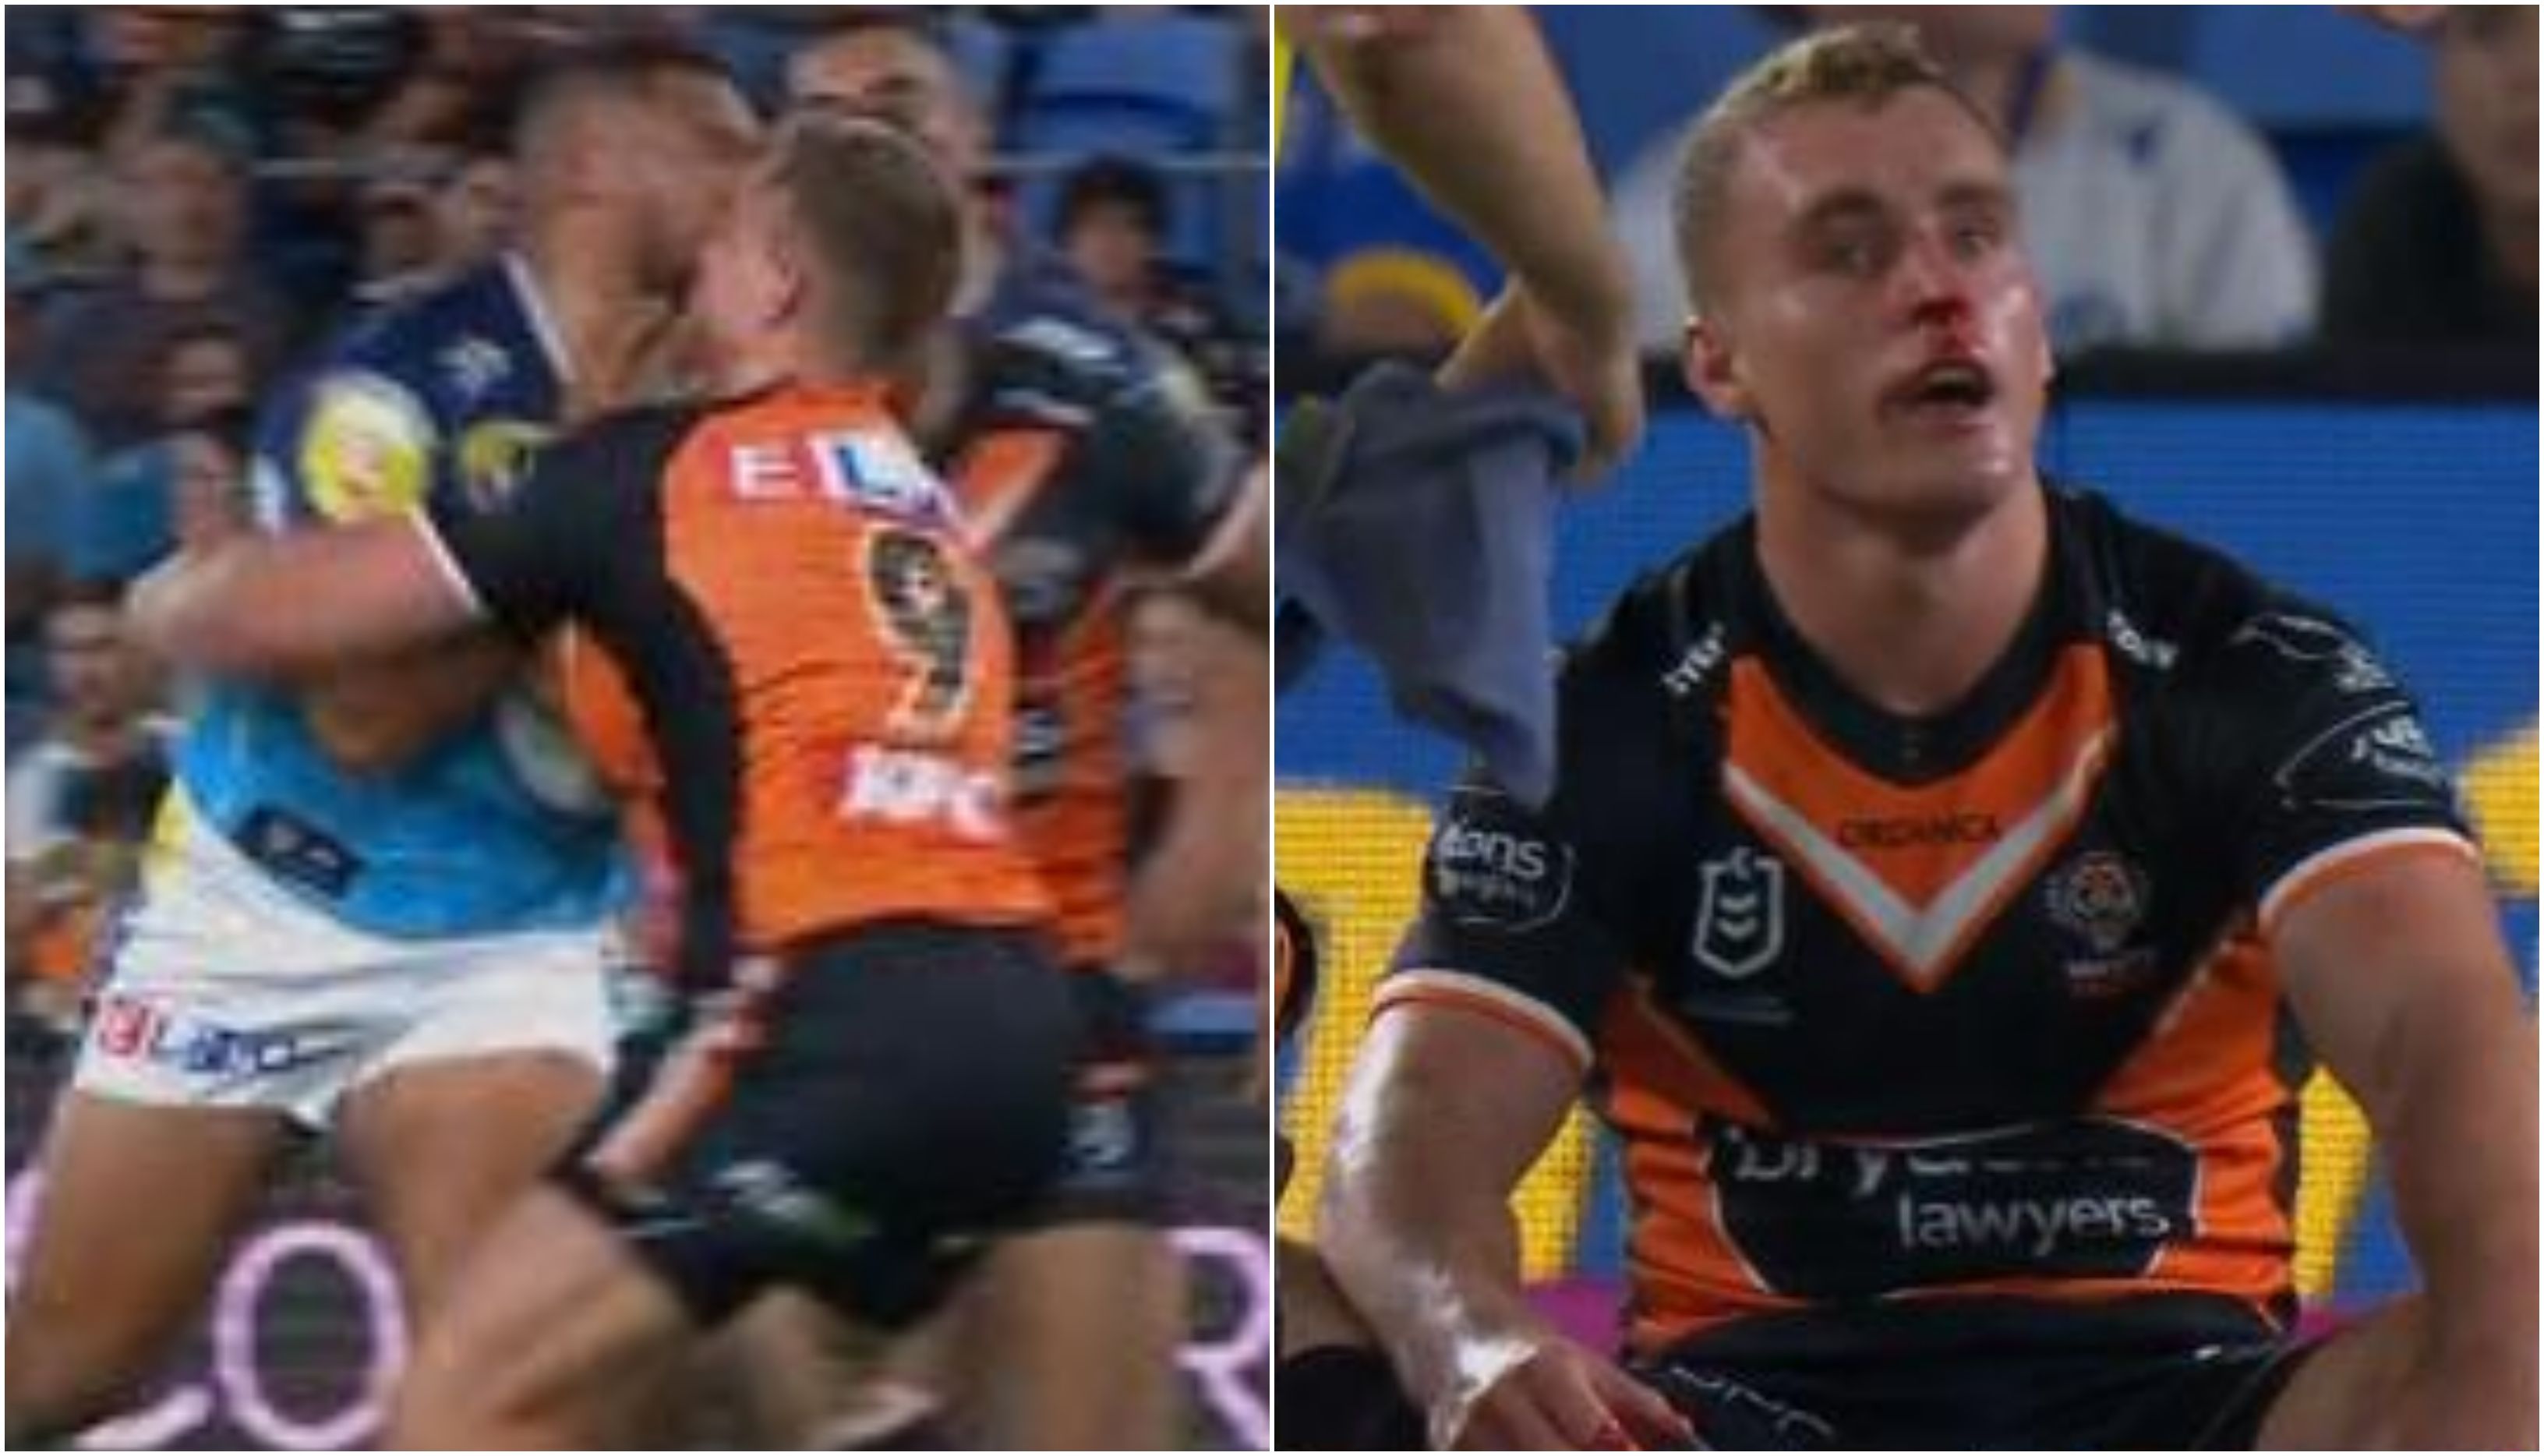 Tiger Jacob Liddle suffers broken nose in nasty collision, plays on